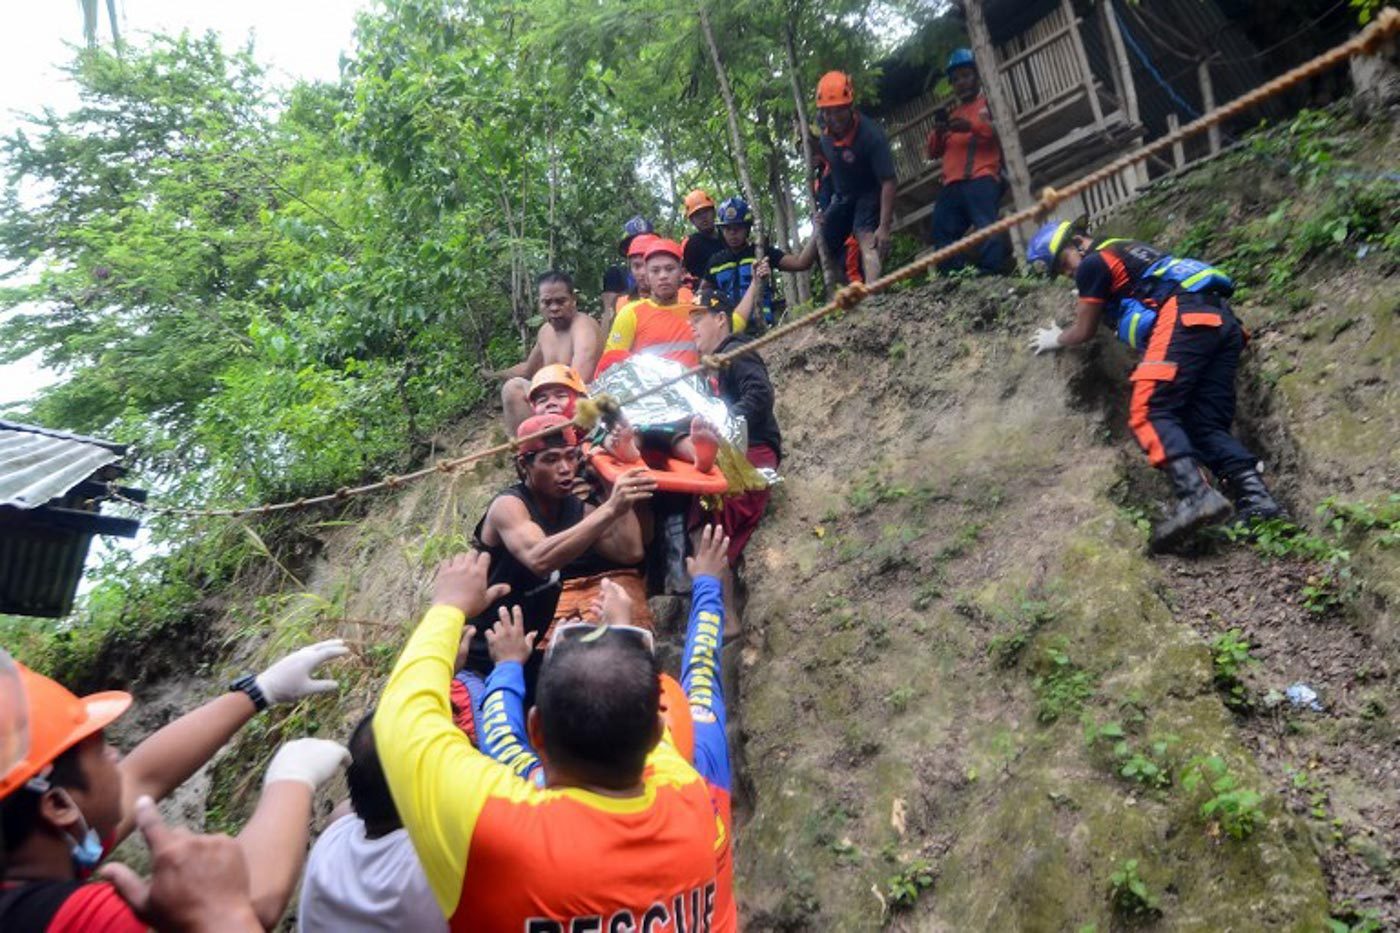 RESPONDERS. Rescuers carry a resident rescued from the landslide site in Naga City, on the popular tourist island of Cebu on September 20, 2018. Photo by Alan Tangcawan/AFP 